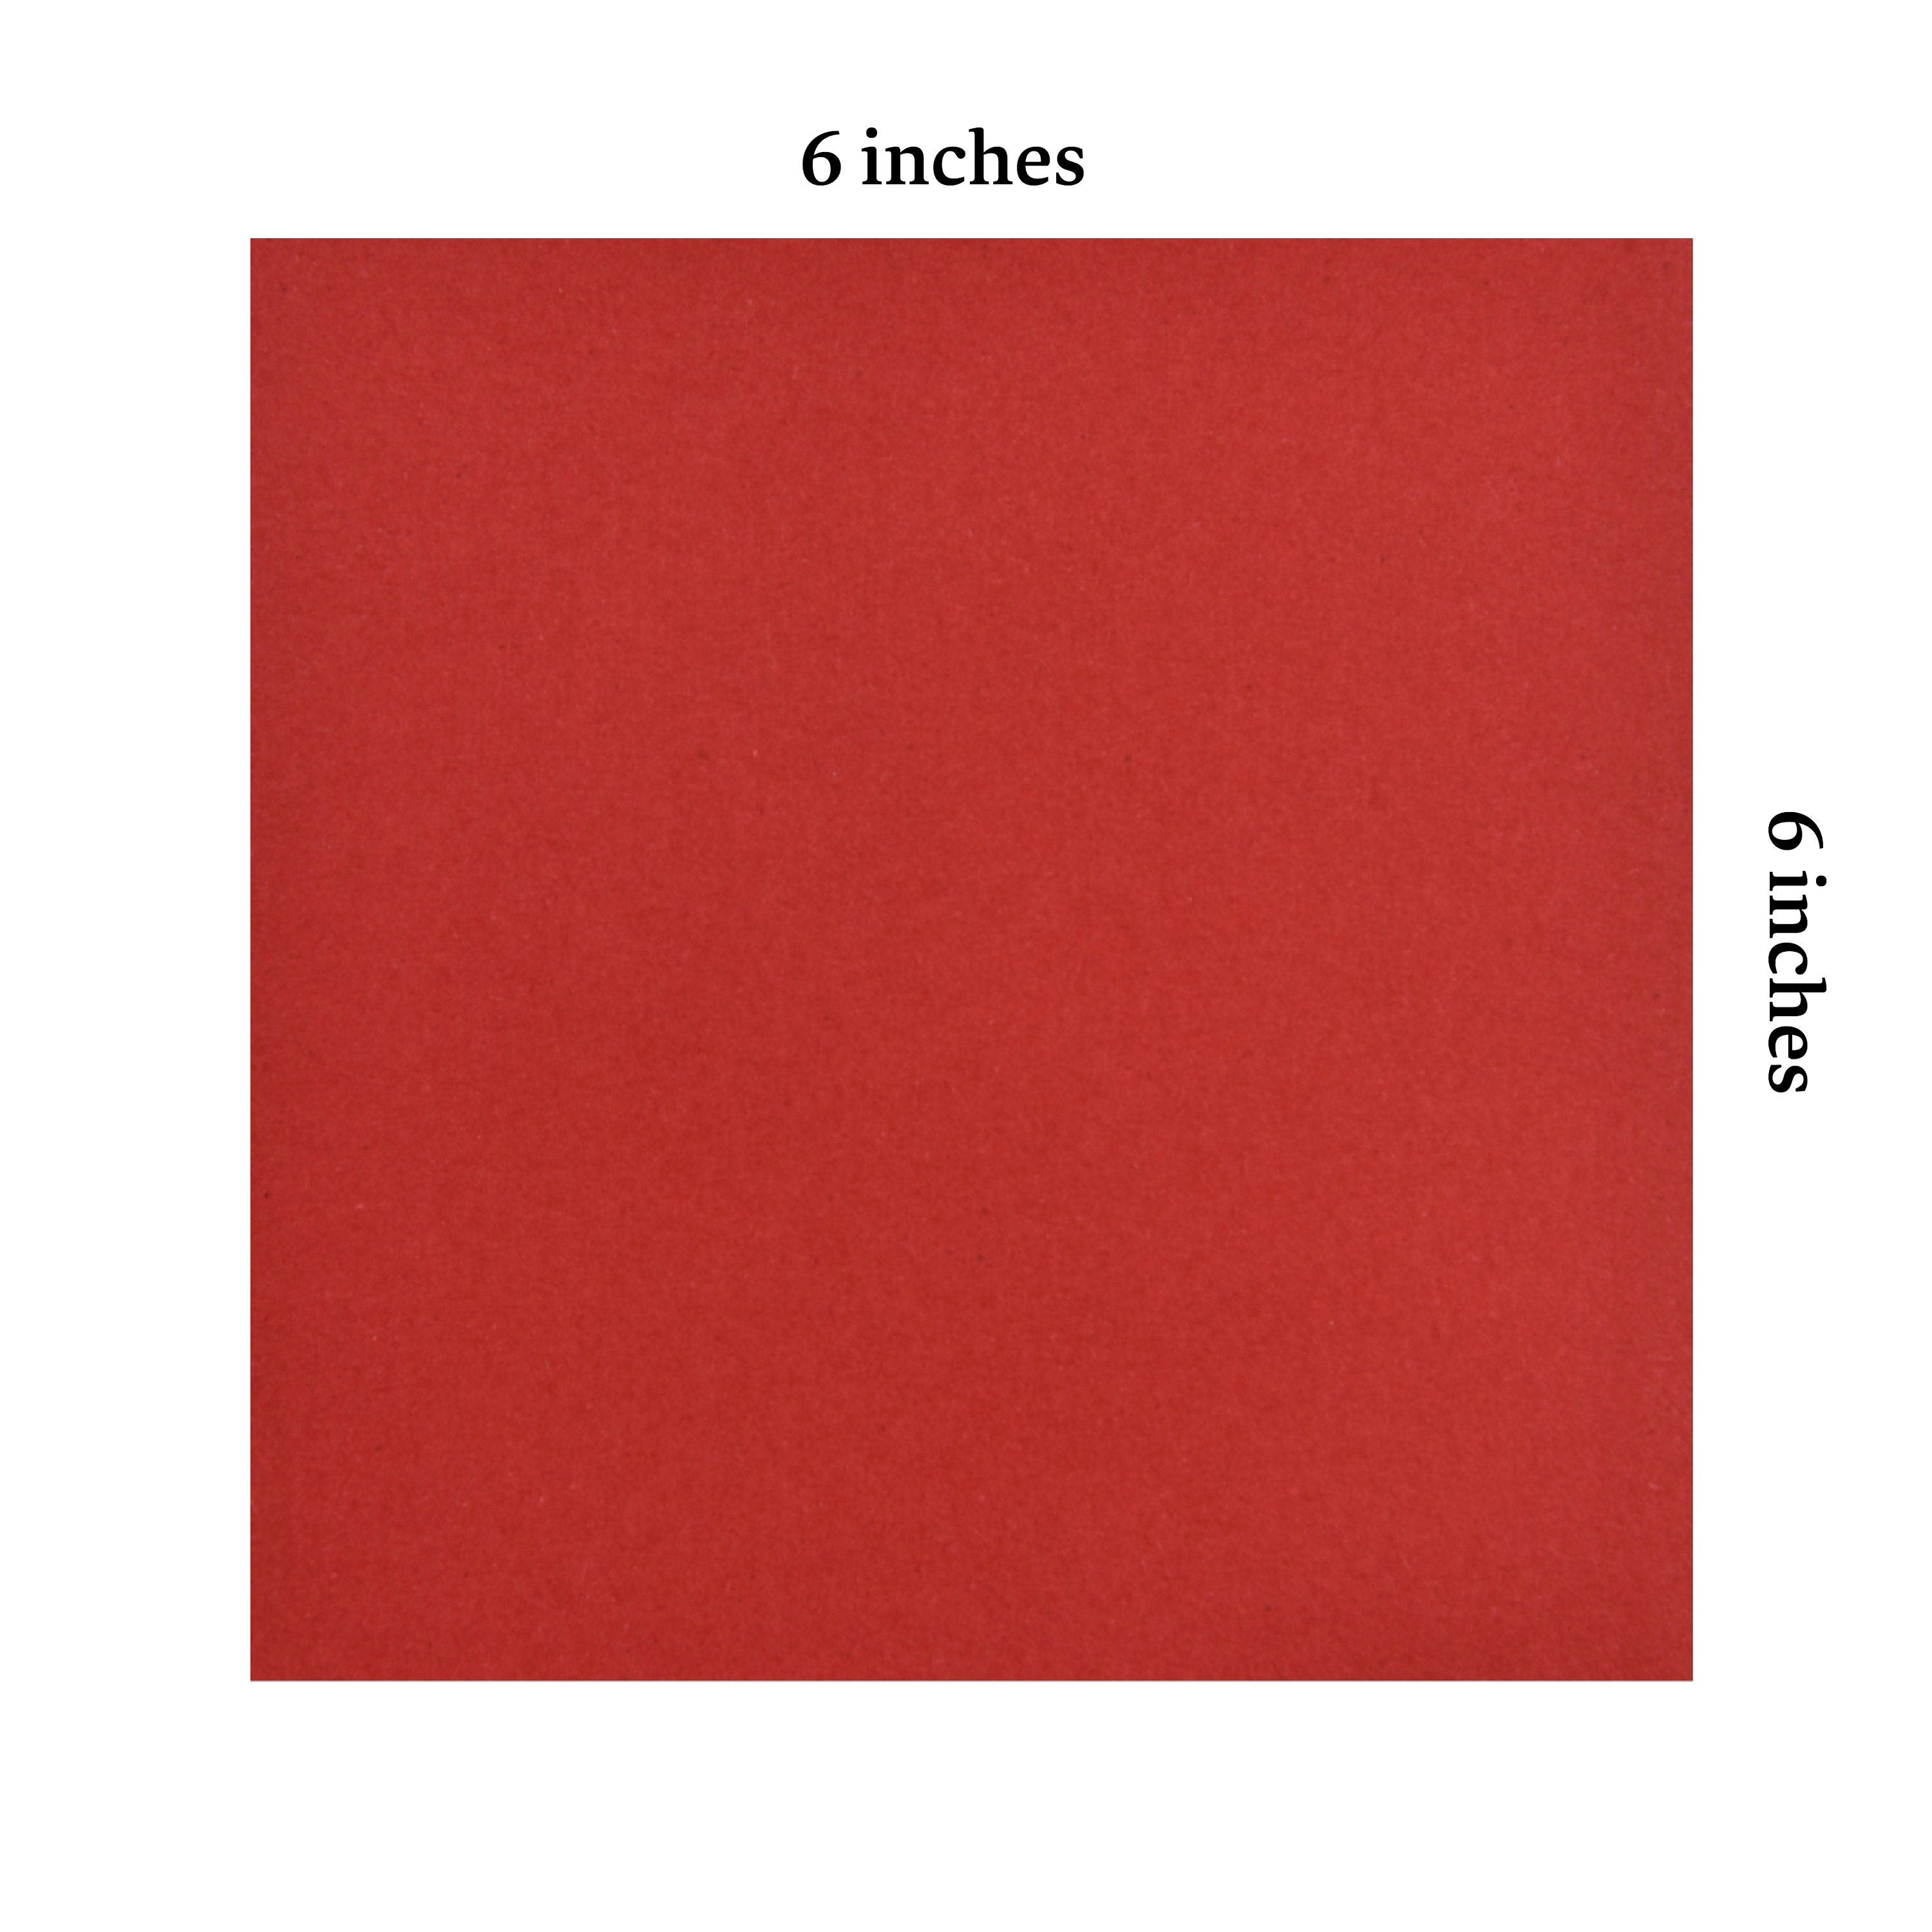 100 Red Origami Paper Sheets 6x6 inches Square Paper Pack for Folding, Origami Cranes, and Decoration - S16